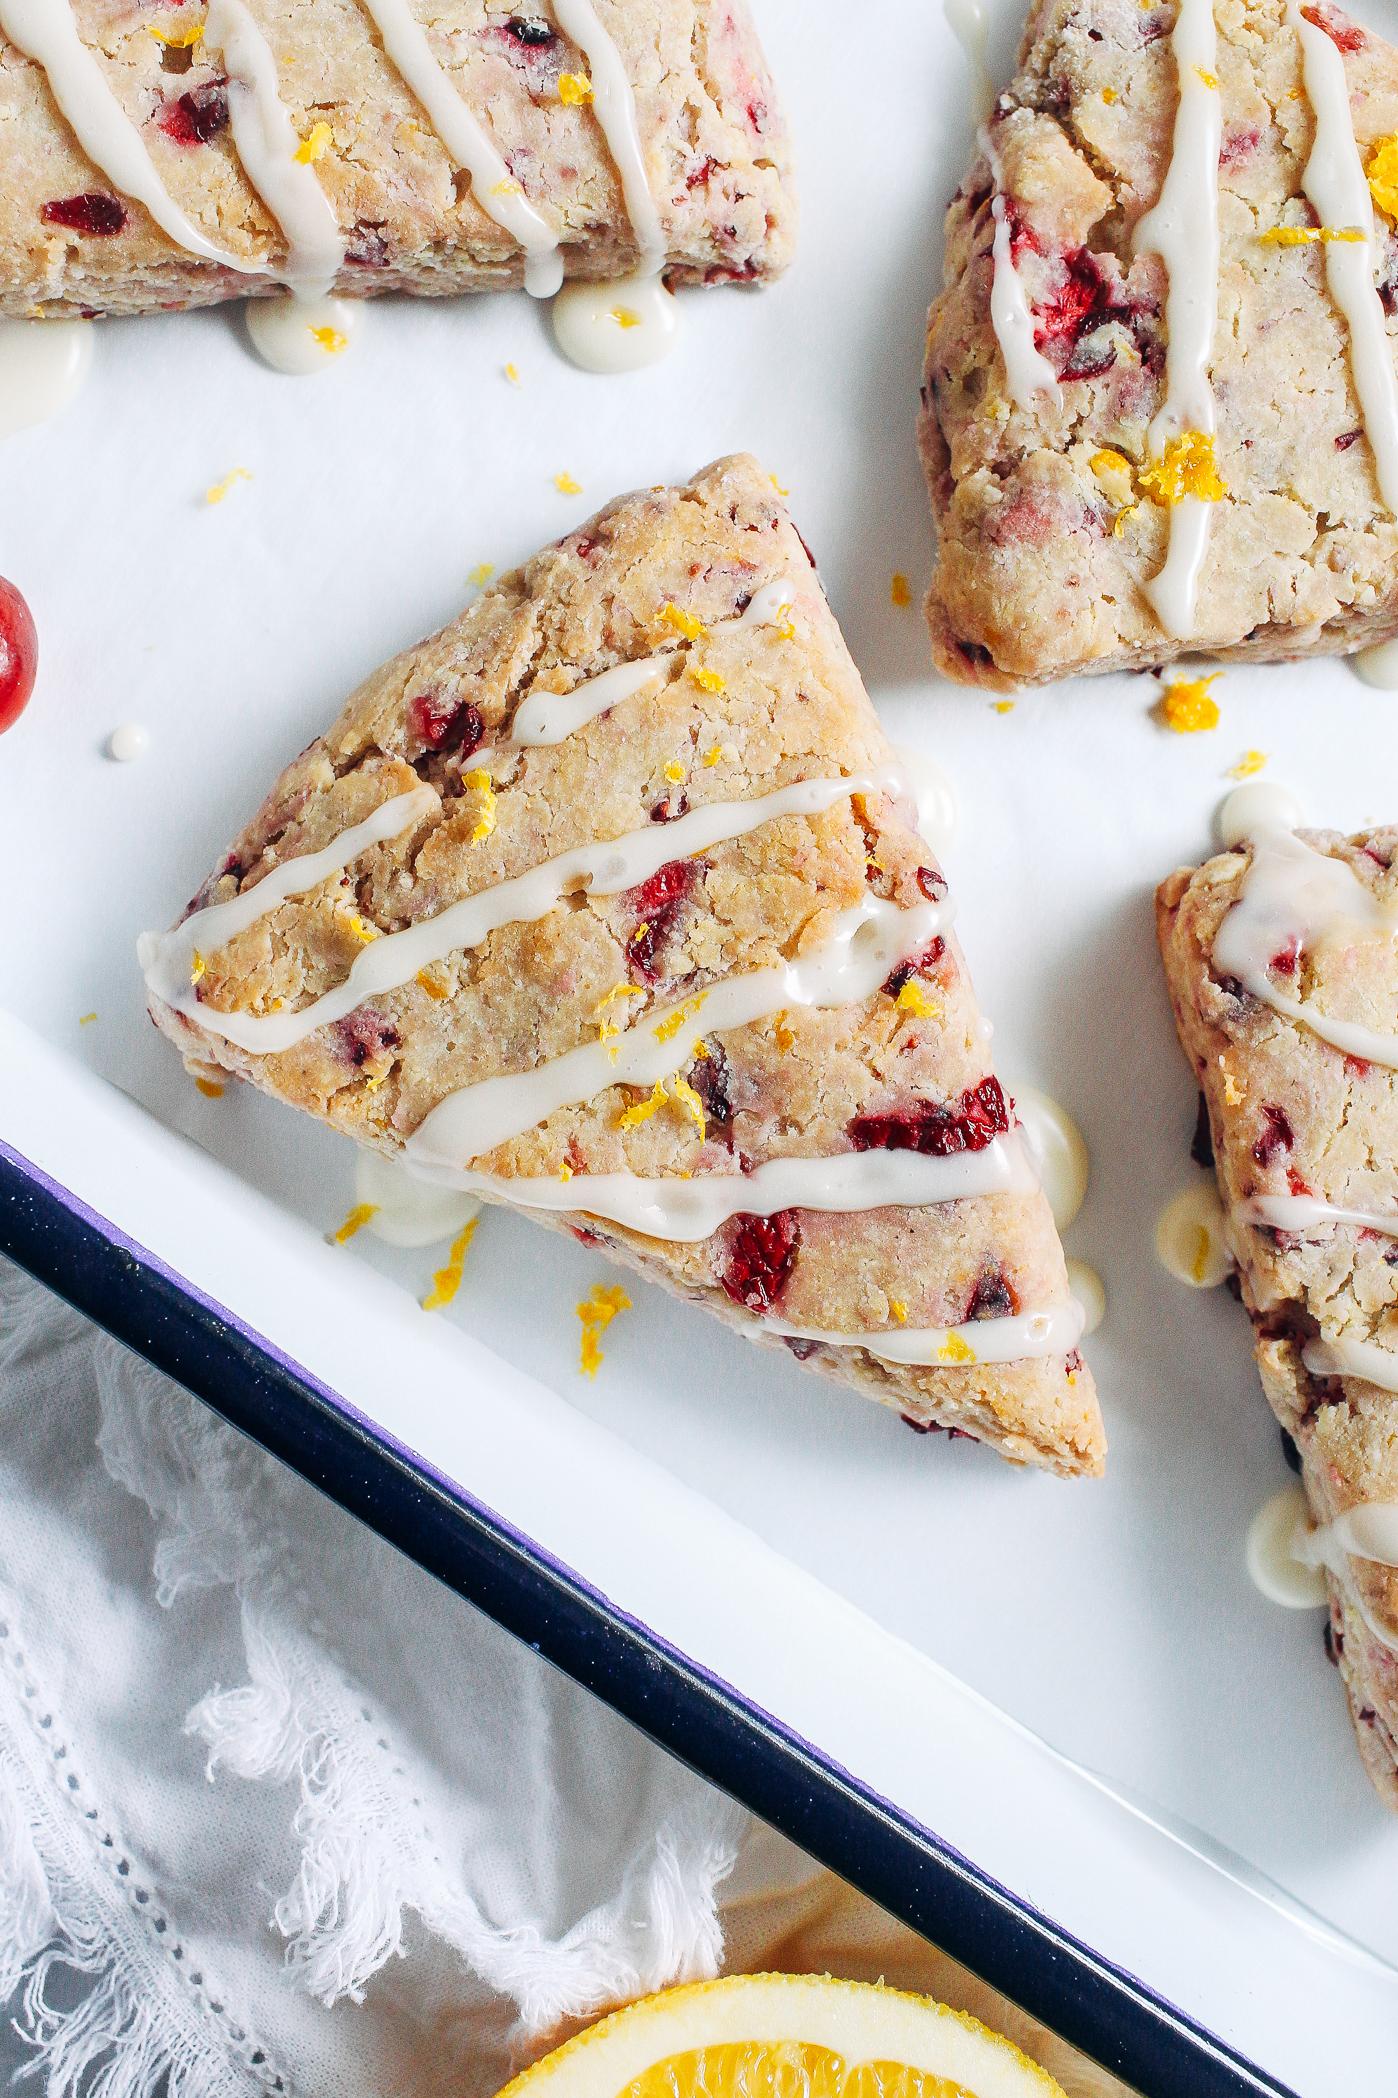  These scones will tickle your taste buds with the amazing texture and flavor.